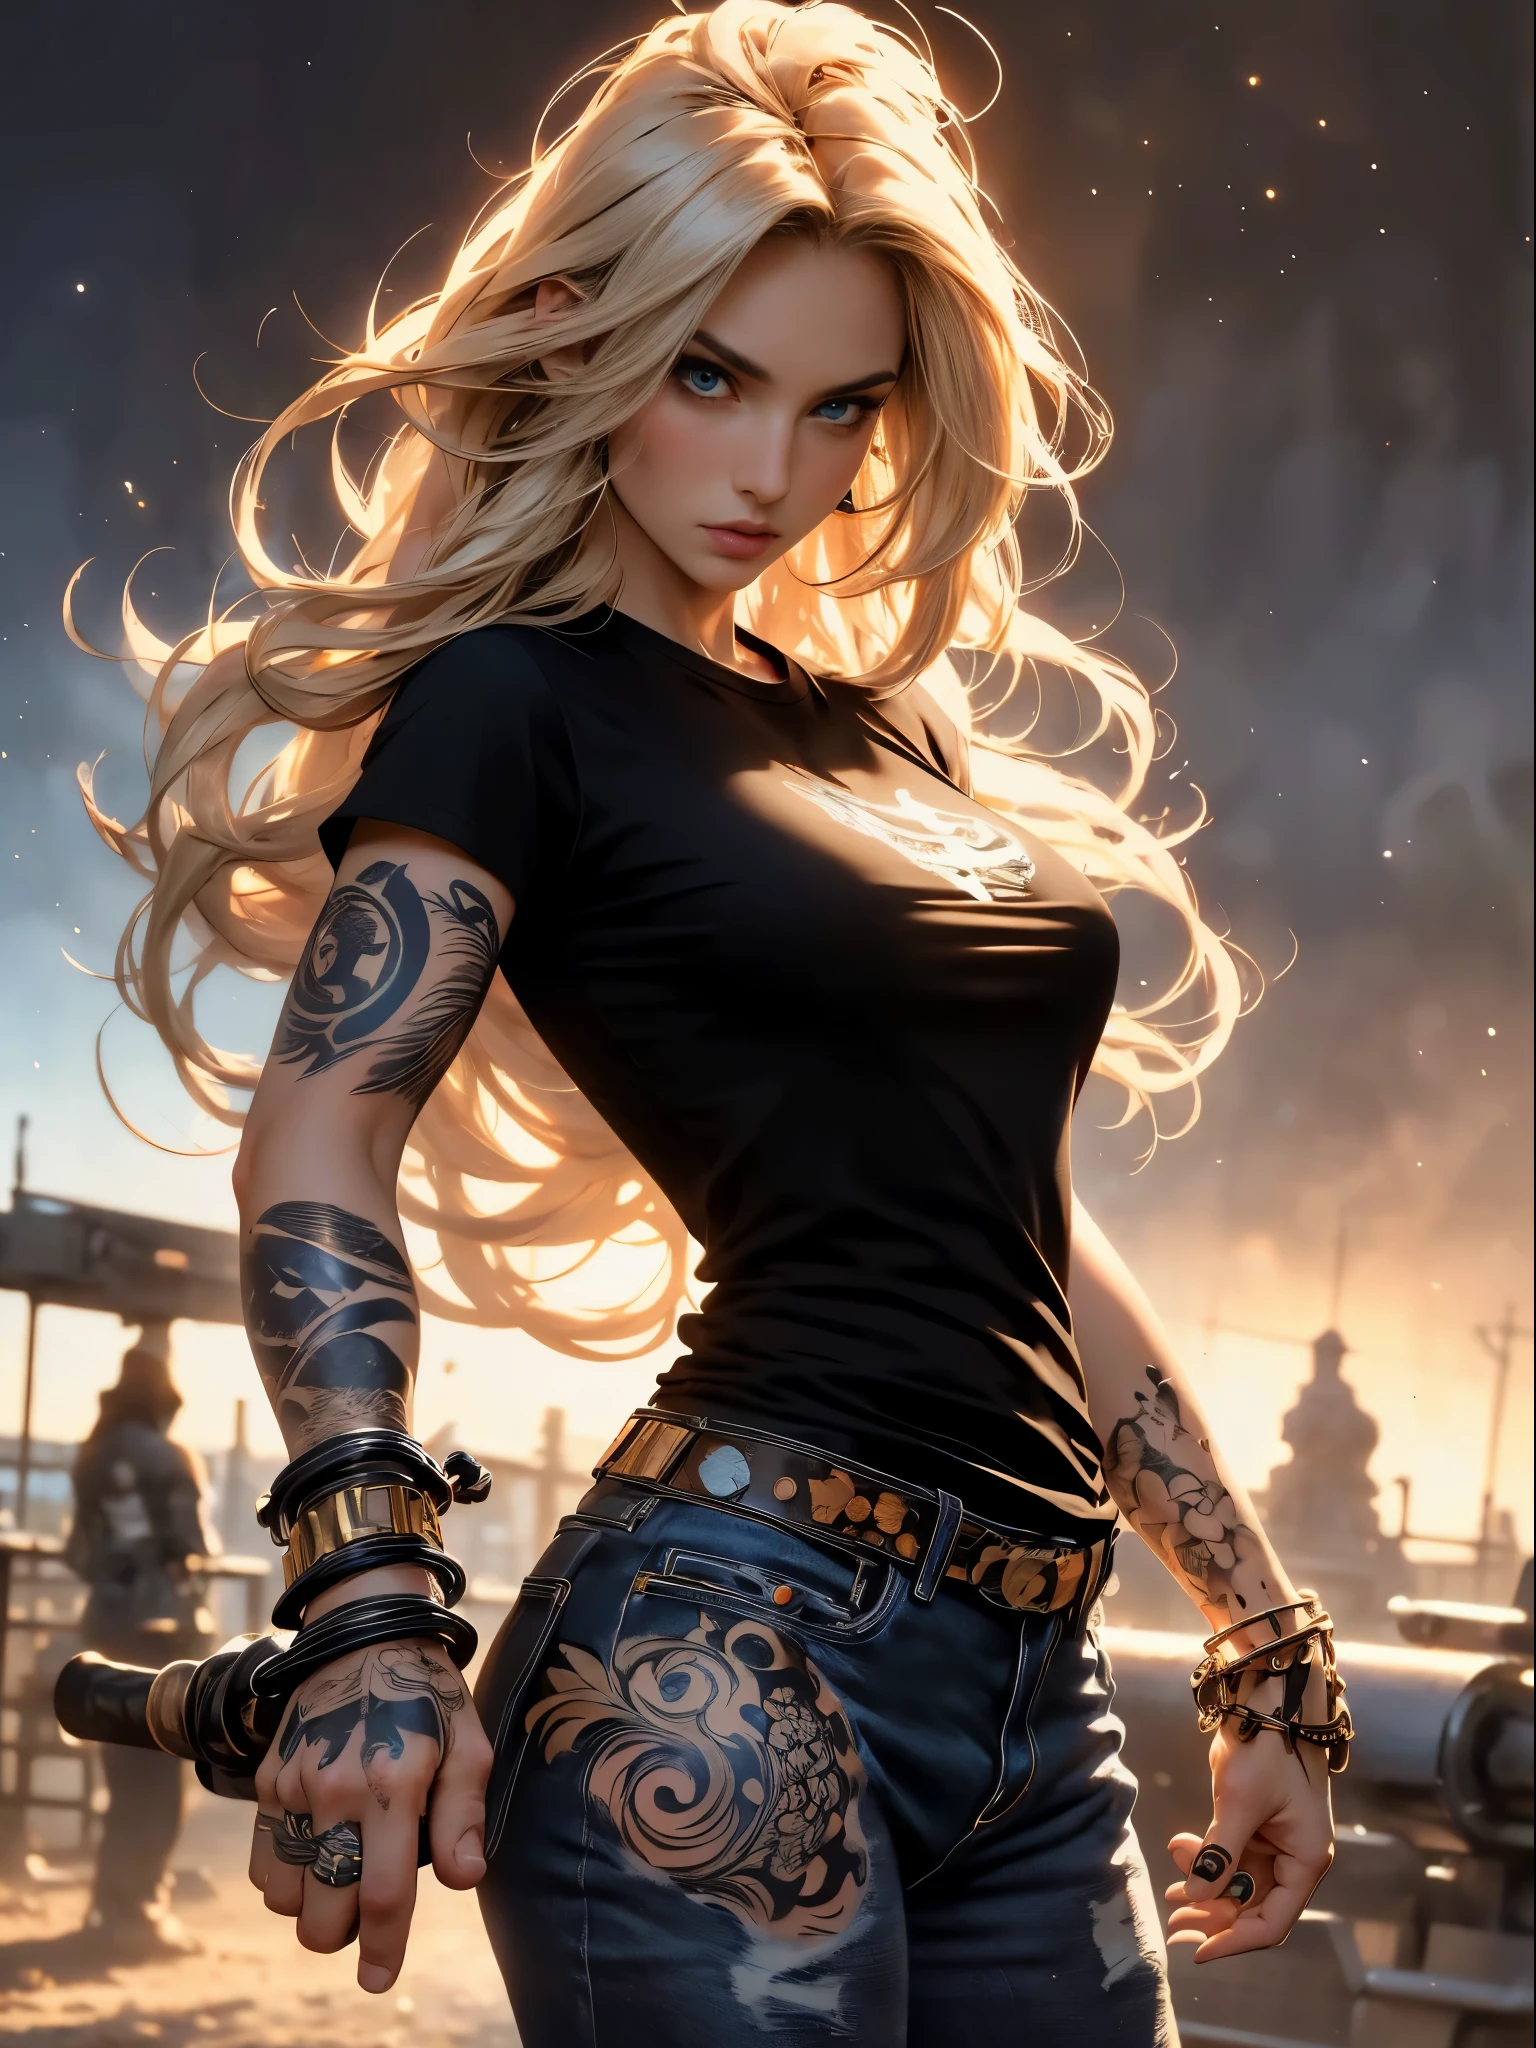 masterpiece, Cowboy shot, (1woman), (golden hairs), (Black tshirt:1.2), (beautiful blue seductive eyes), (tribal tattoo on hands), White, Orange and Blue colors, Foggy background, Graceful pose, (looking at viewer), (front view), (from sky), (bokeh:1.2)